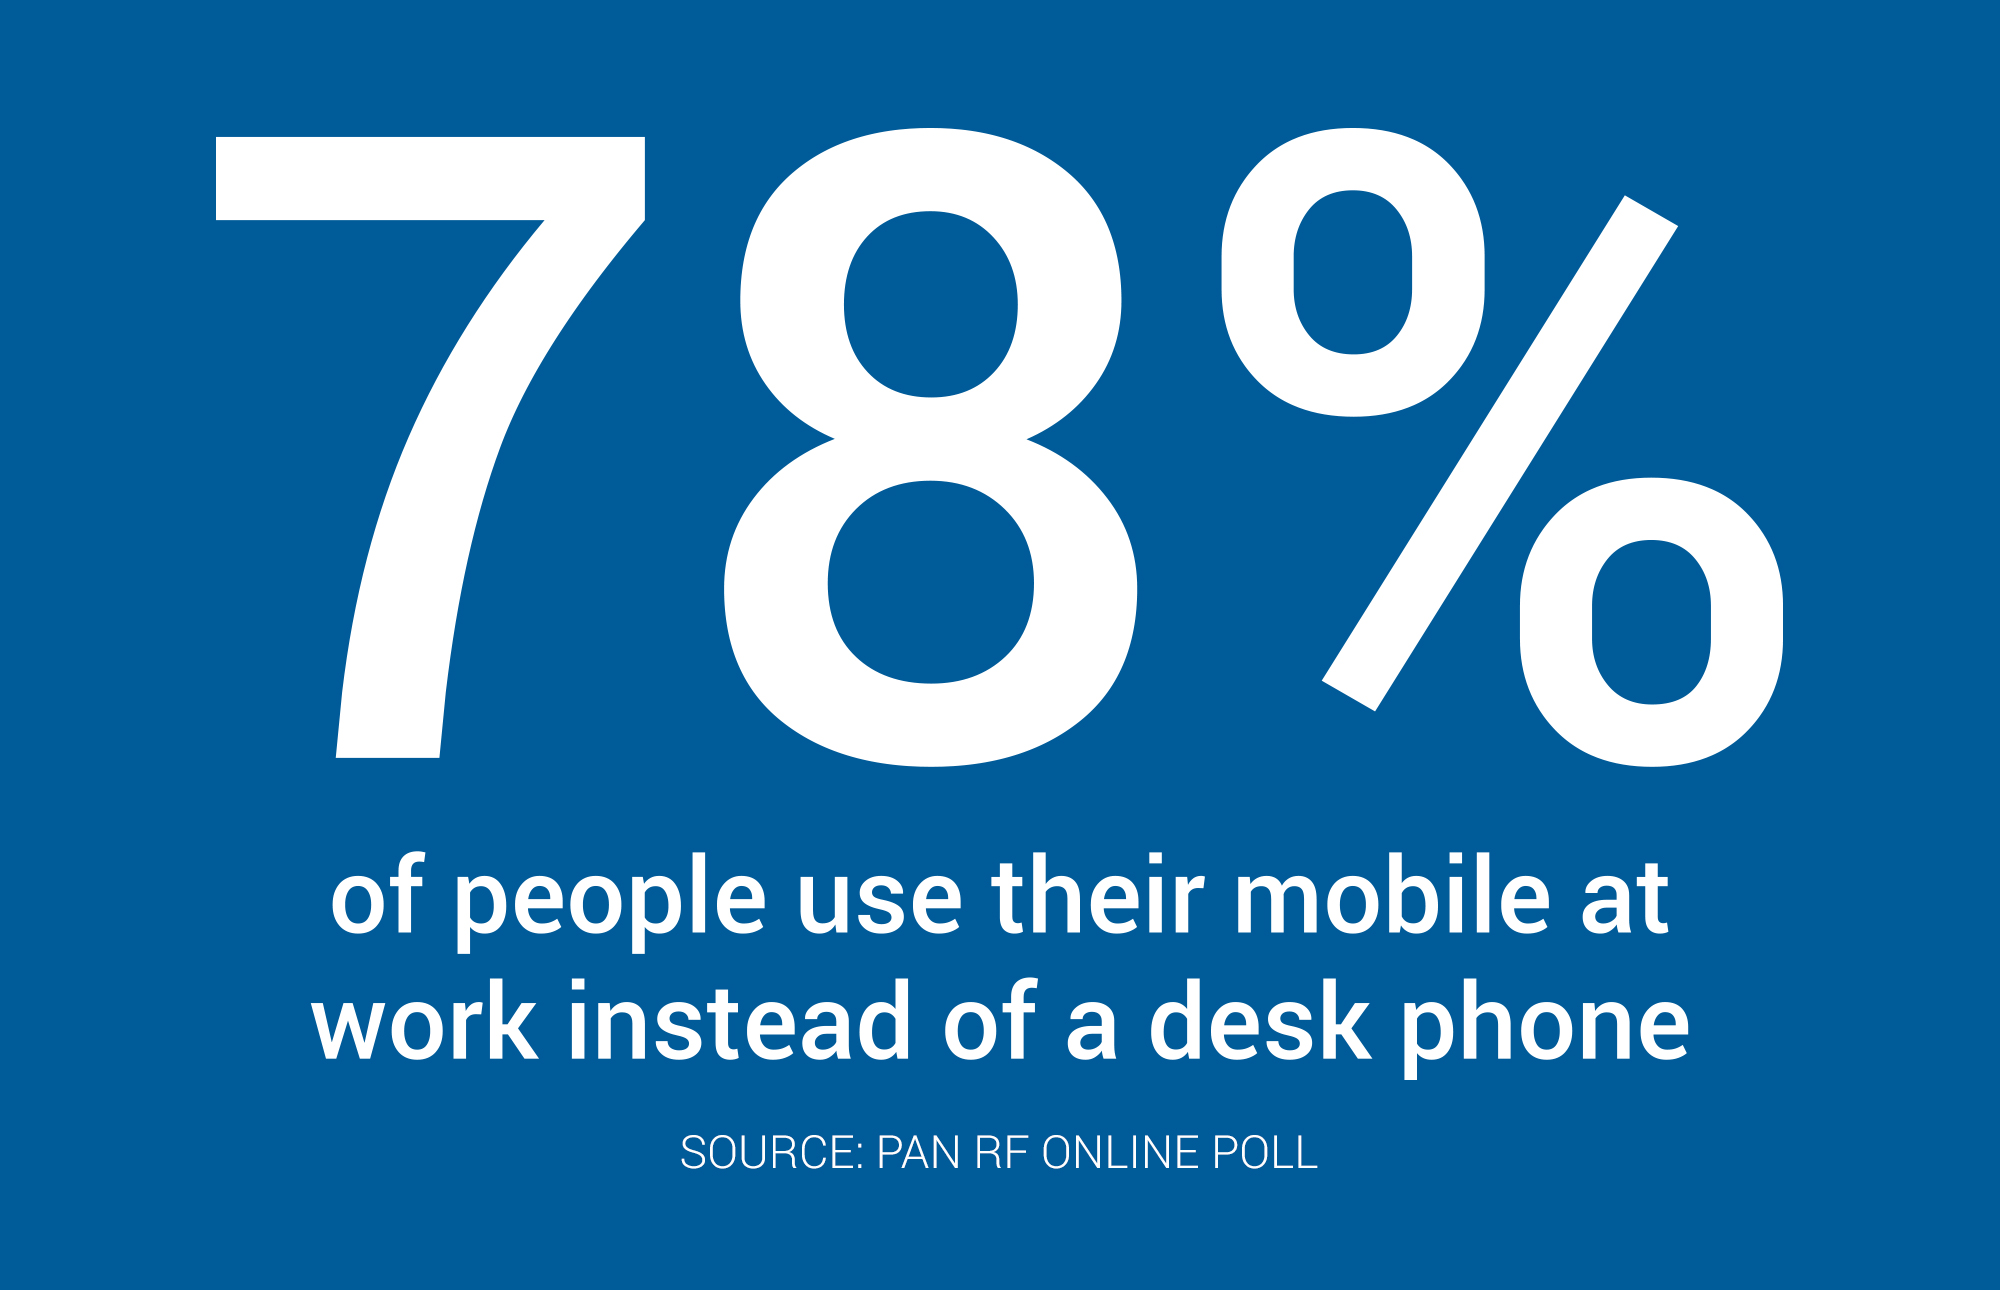 Mobile signal frustration -78 % of people use their mobile at work instead of a desk phone